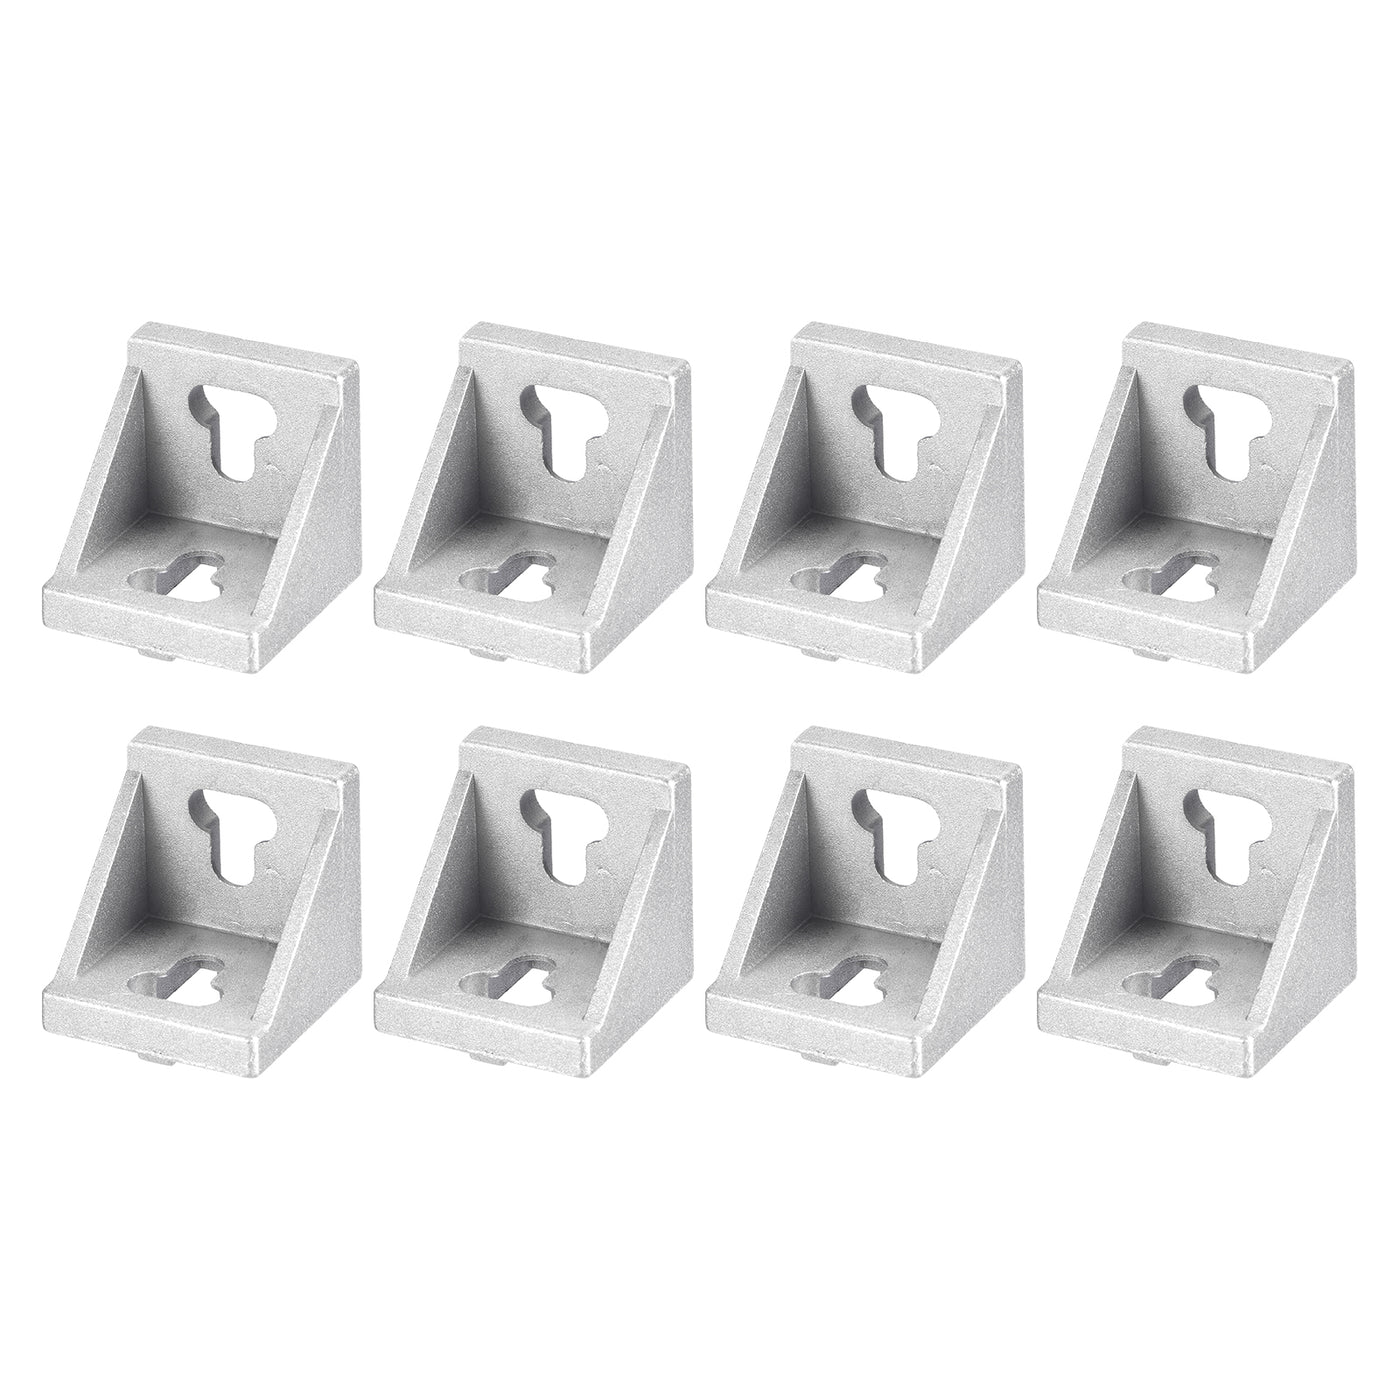 uxcell Uxcell 8Pcs Inside Corner Bracket Gusset, 42x42x43mm 4545 Angle Connectors for 4545/5050 Series Aluminum Extrusion Profile Silver